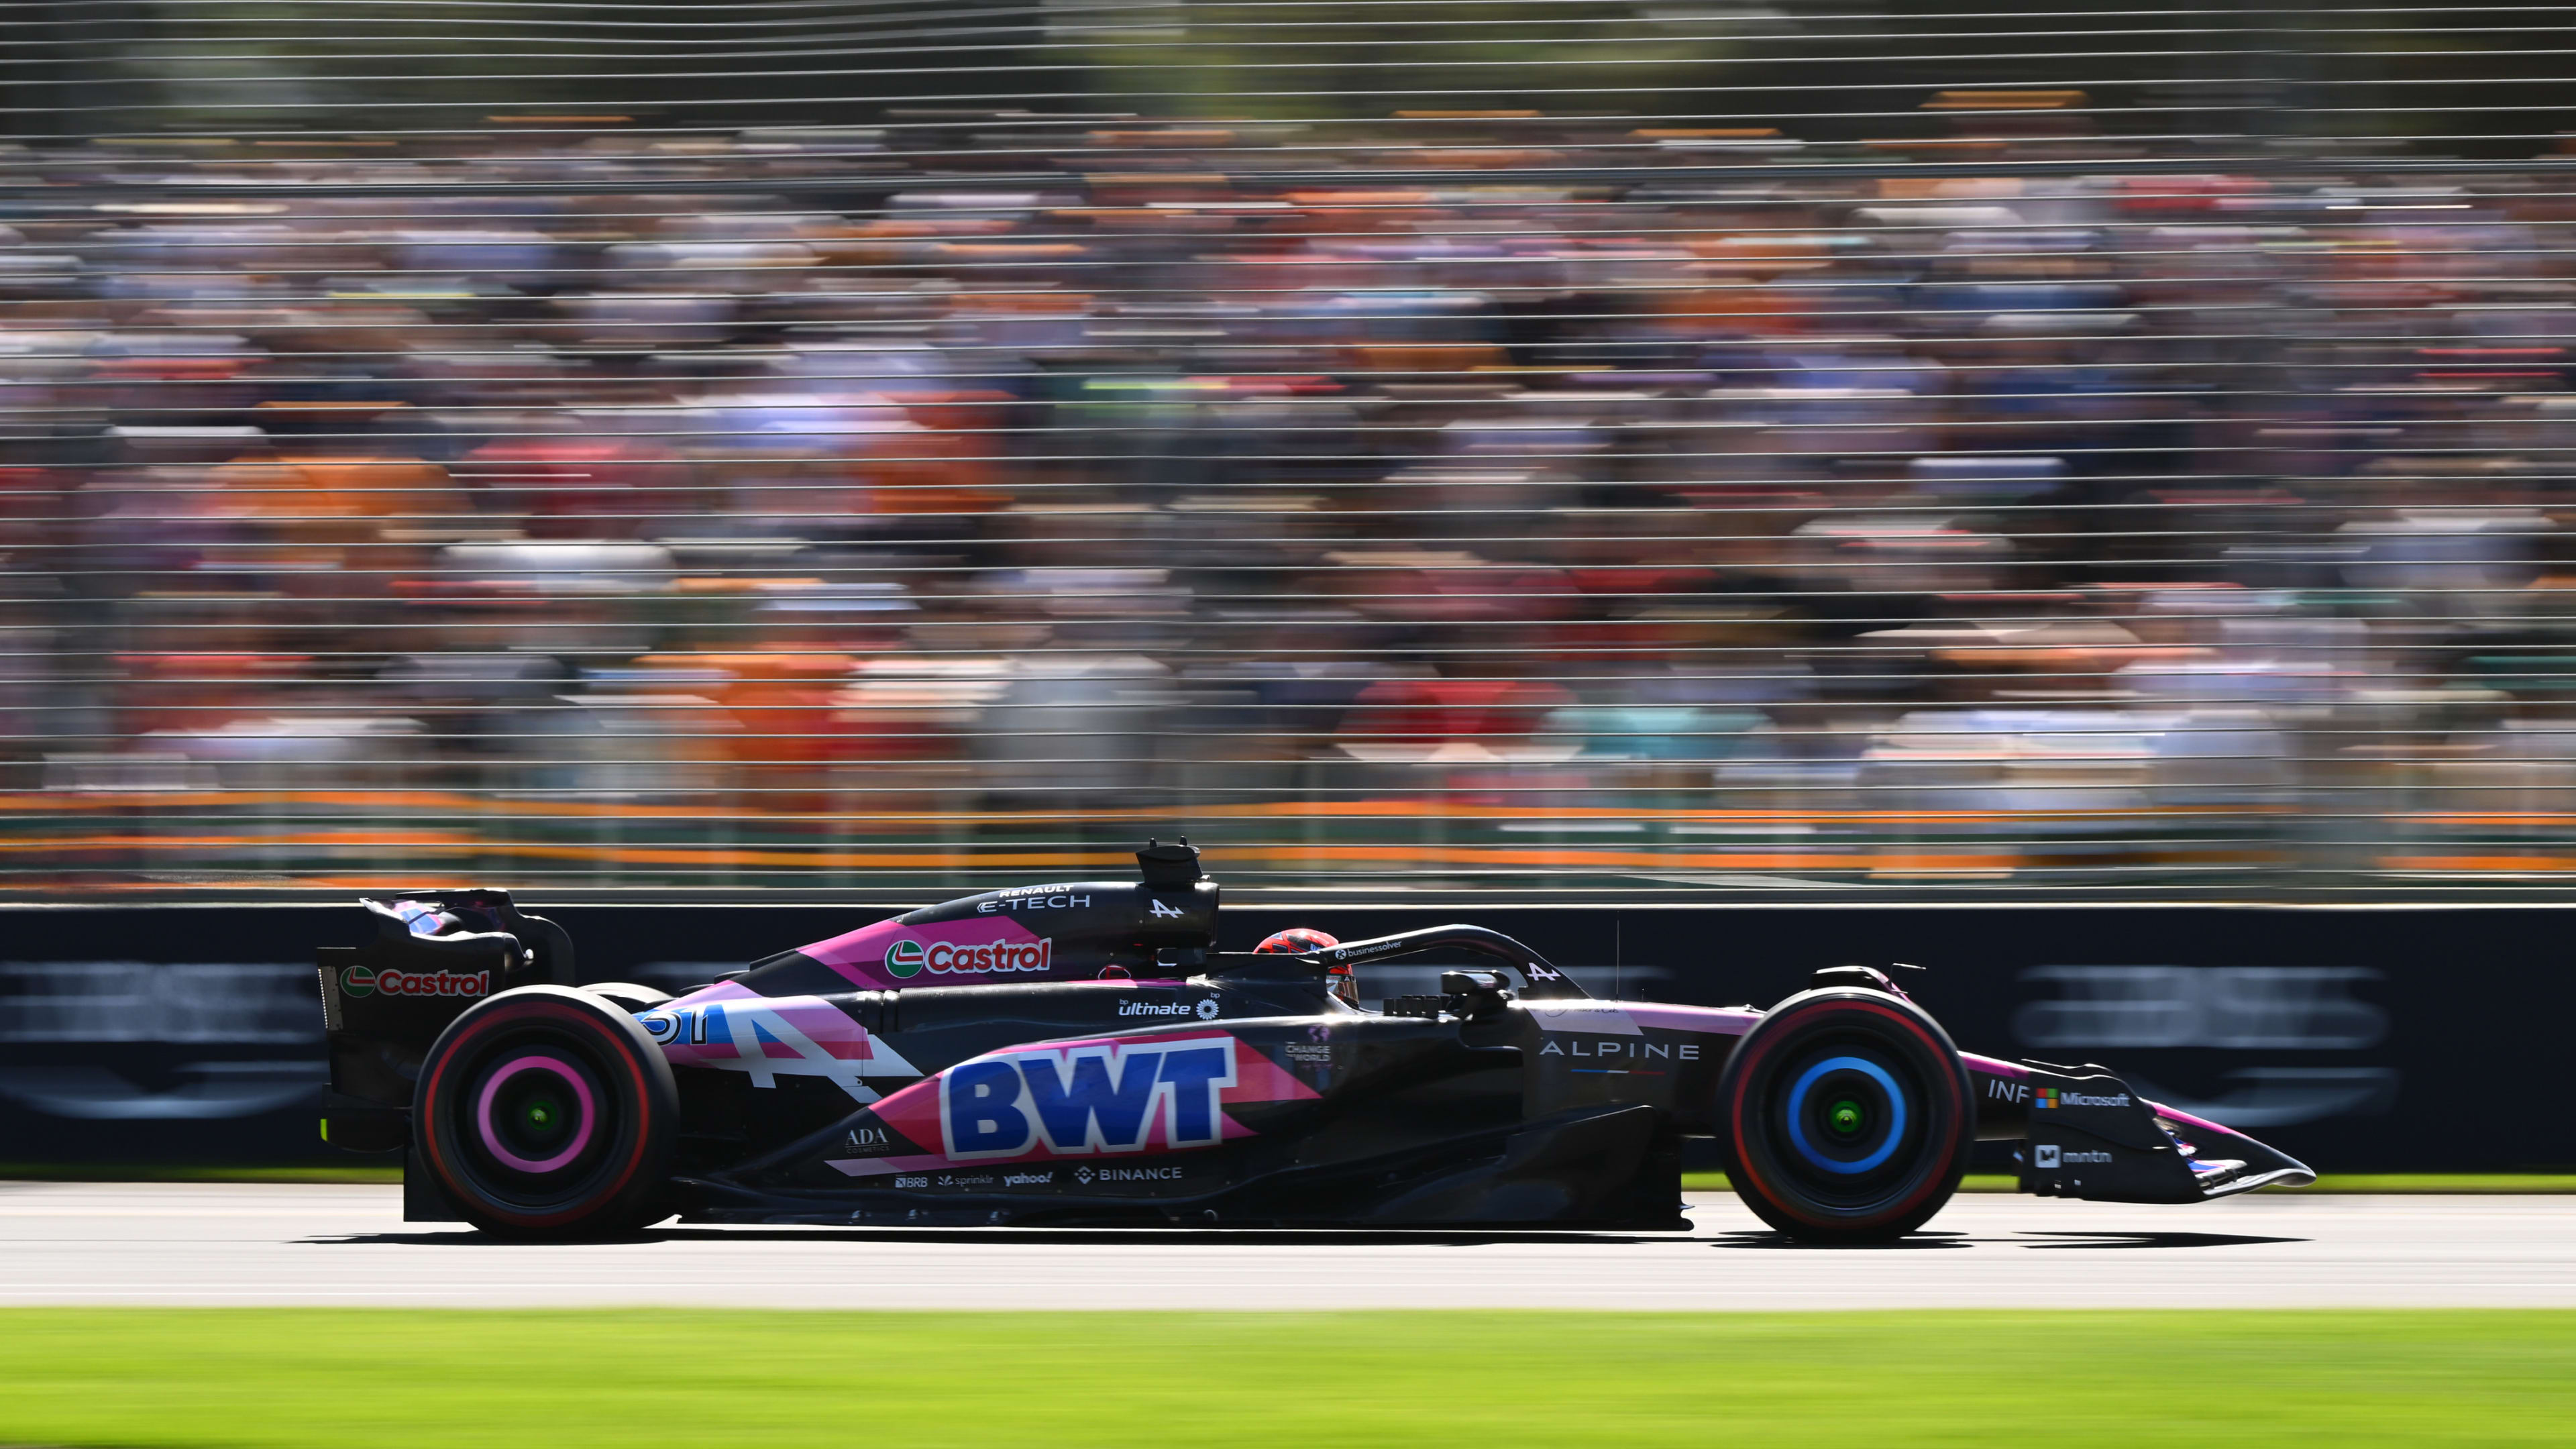 LIVE COVERAGE: Follow all the action from second practice for the Australian Grand Prix